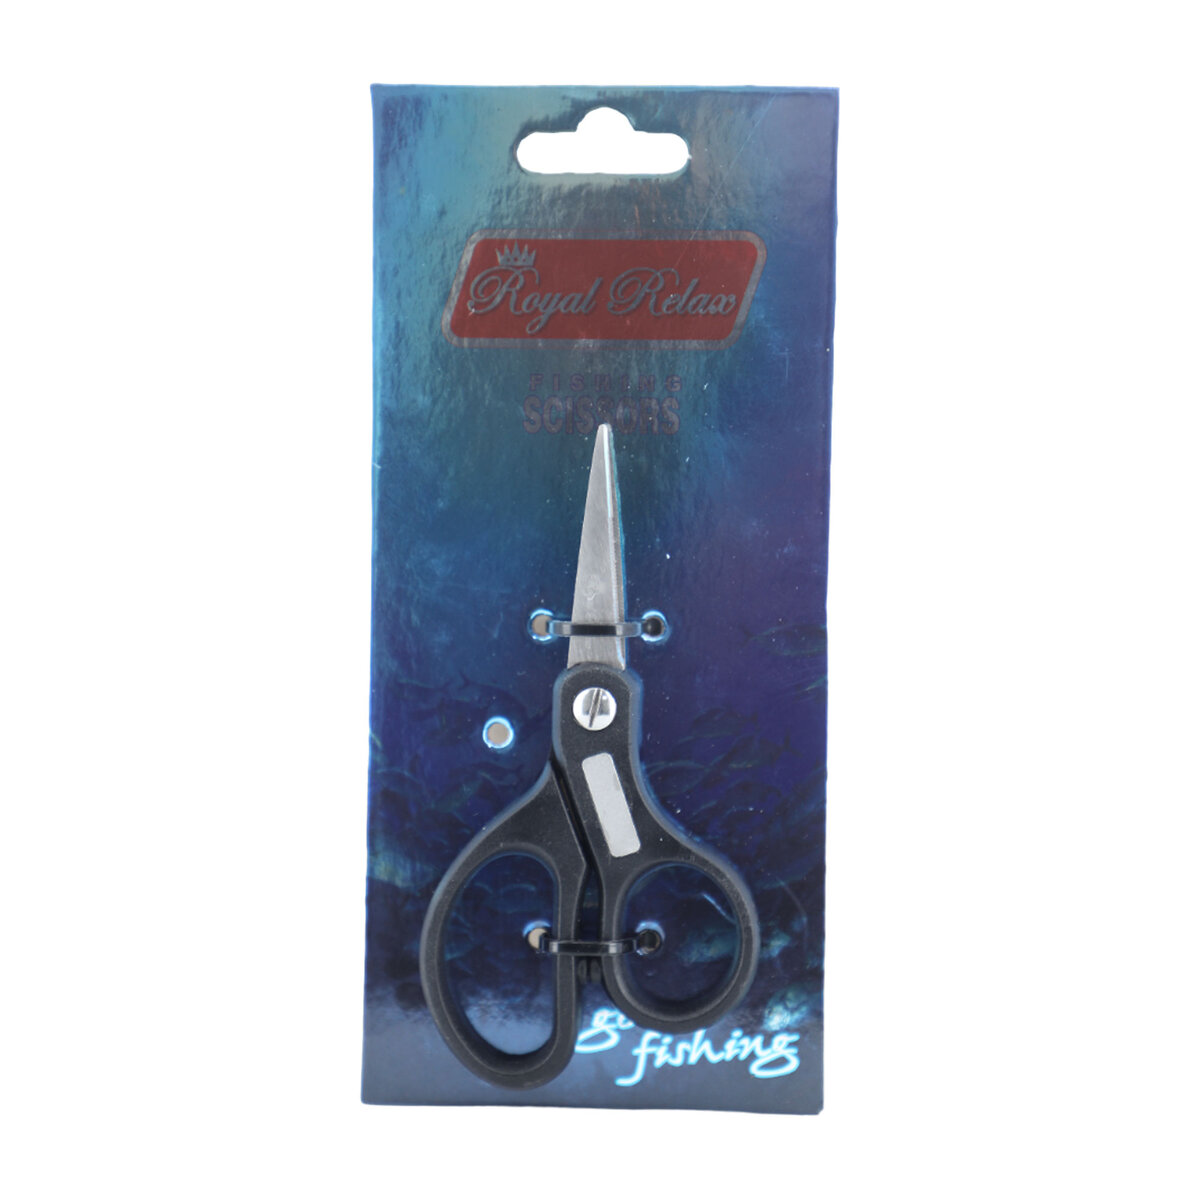 Royal Relax Fishing Scissors 156A Online at Best Price